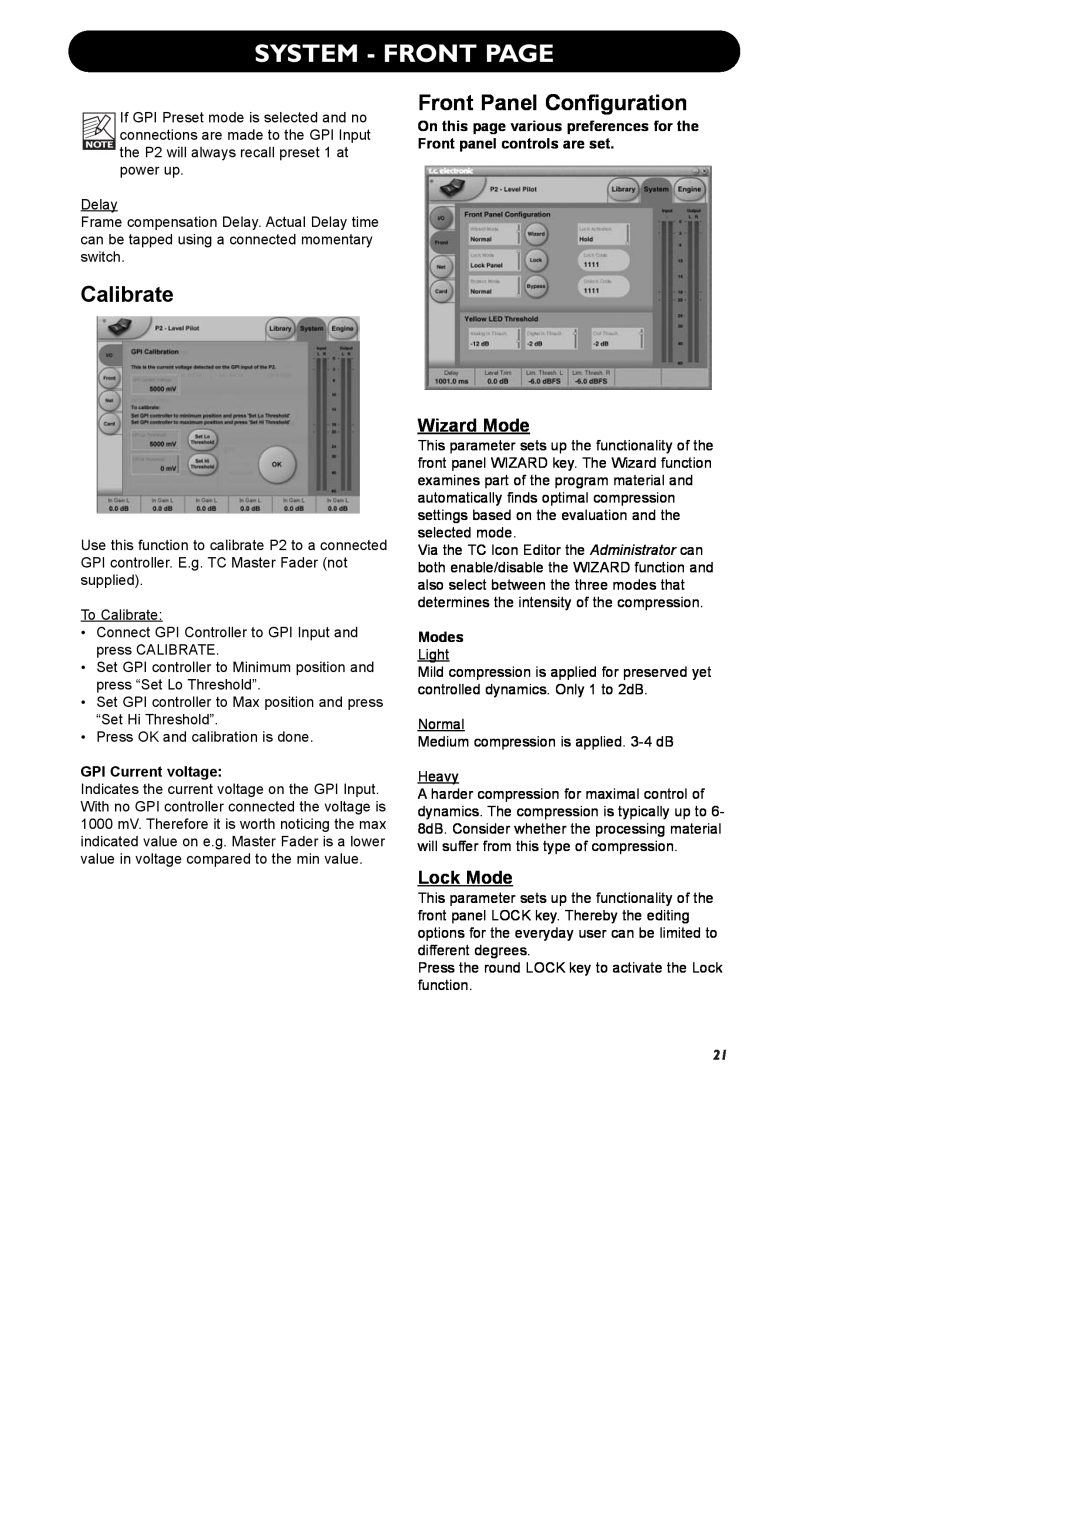 TC electronic SDN BHD P2 manual System - Front Page, Calibrate, Front Panel Configuration, Wizard Mode, Lock Mode, Modes 